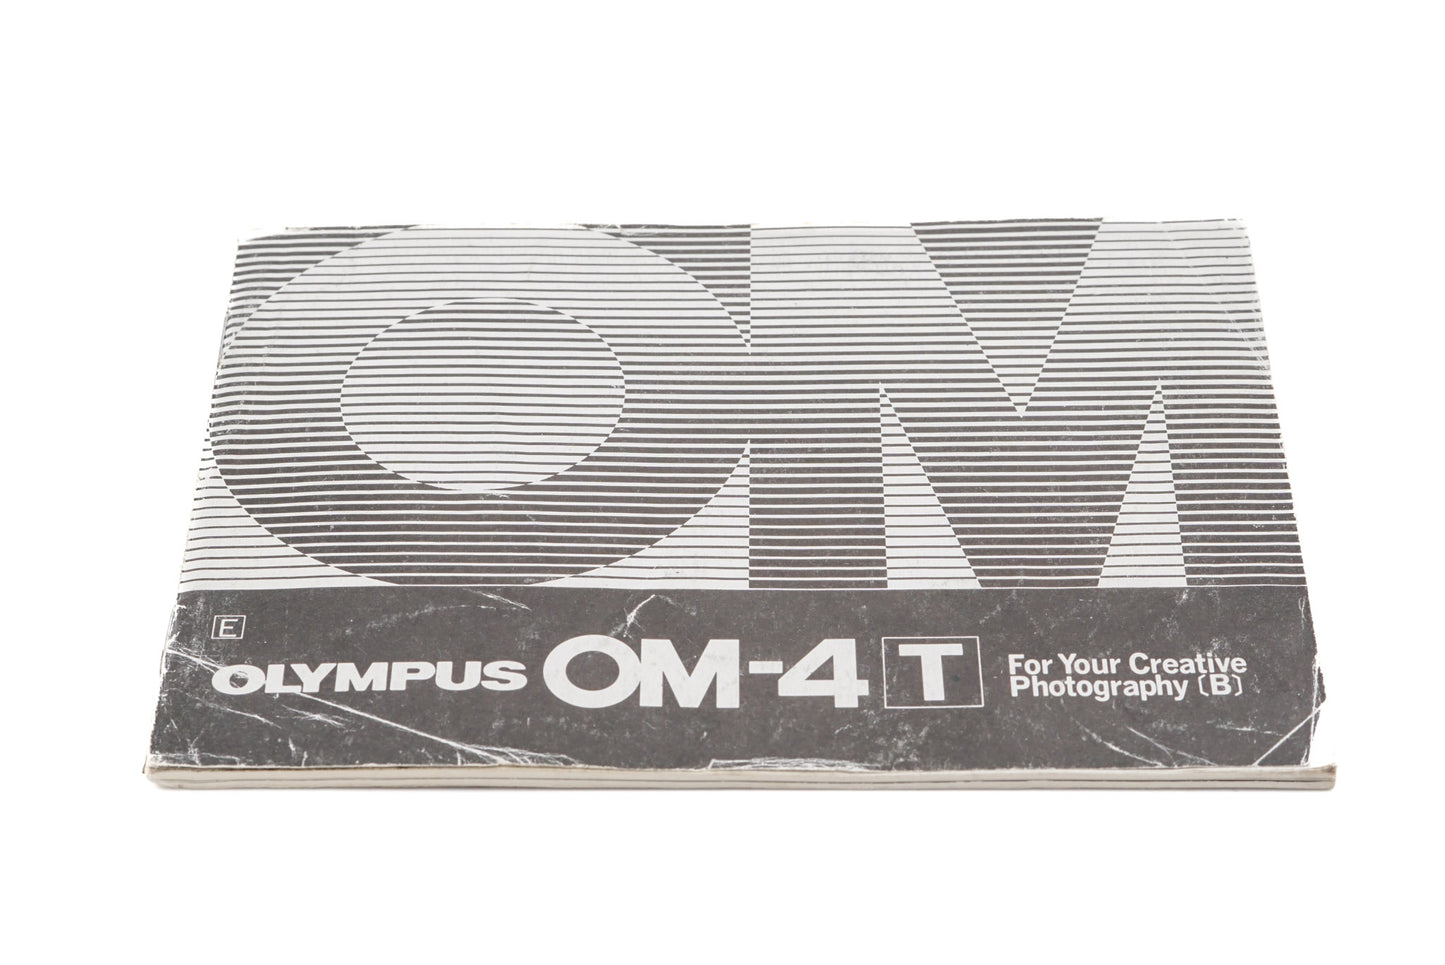 Olympus OM-4Ti For Your Creative Photography Booklet